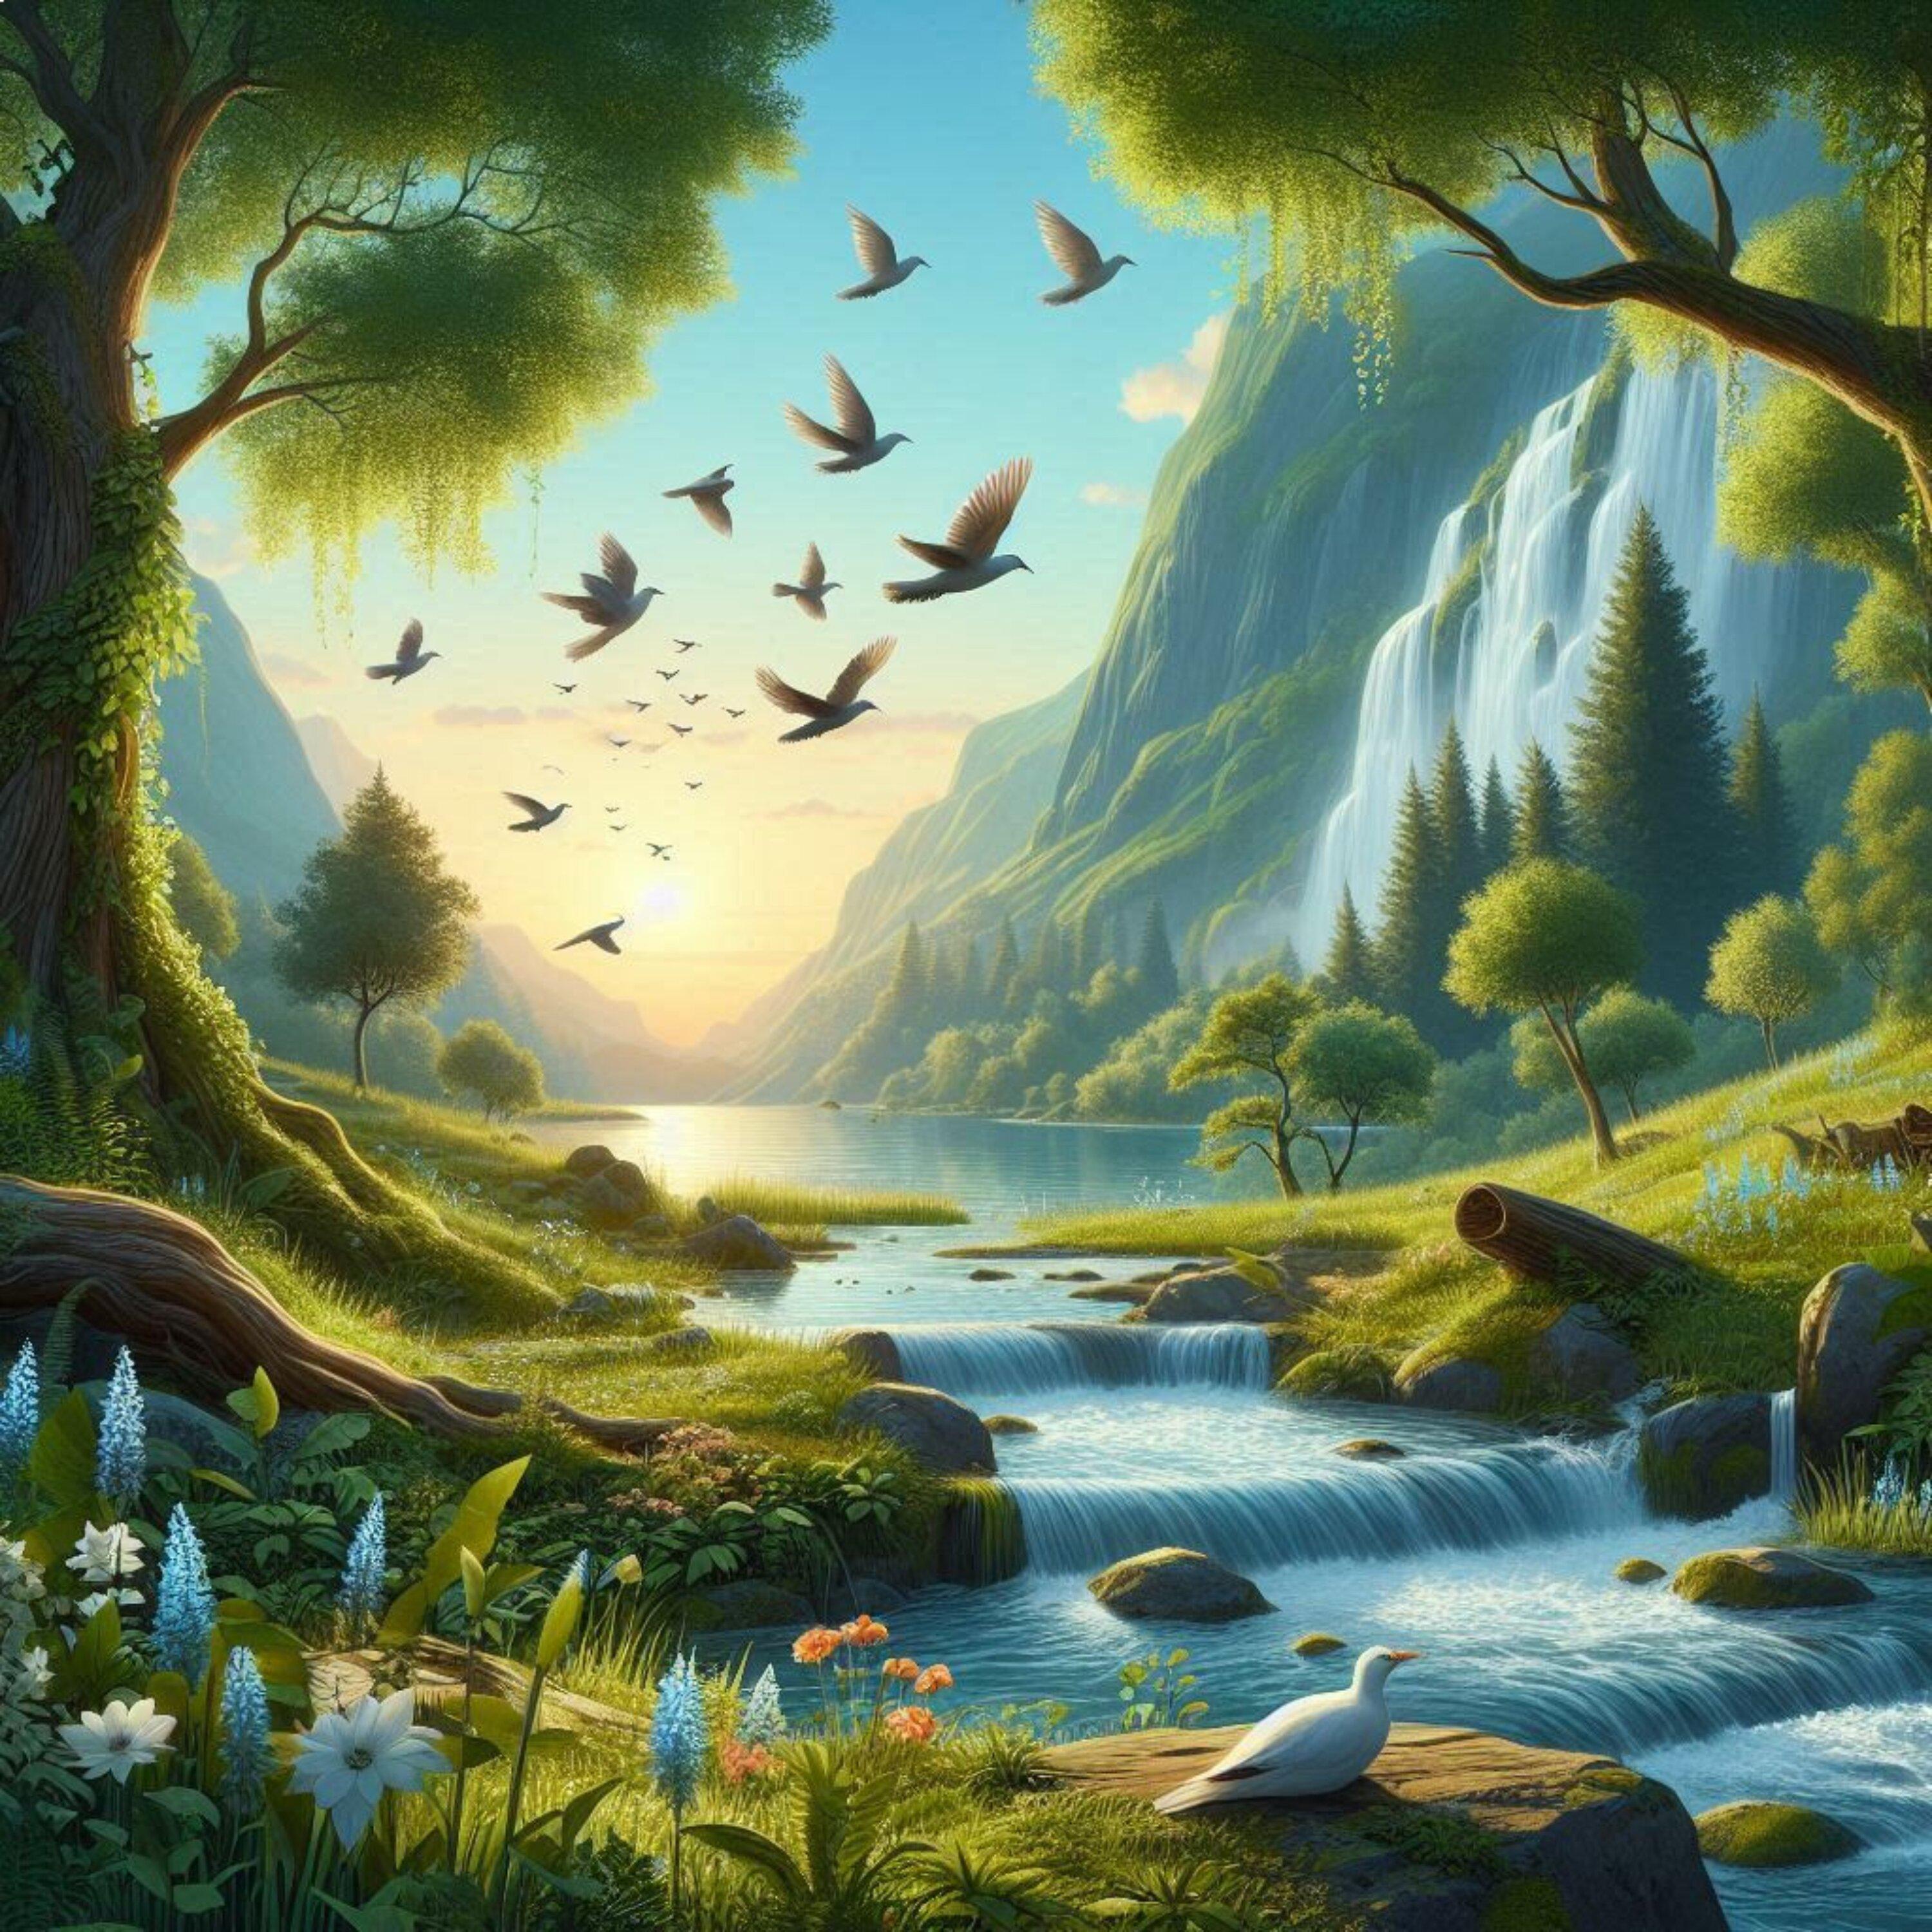 Zarek Atlas - Relaxing Landscape with Birds and Flowing Water in the Background 2